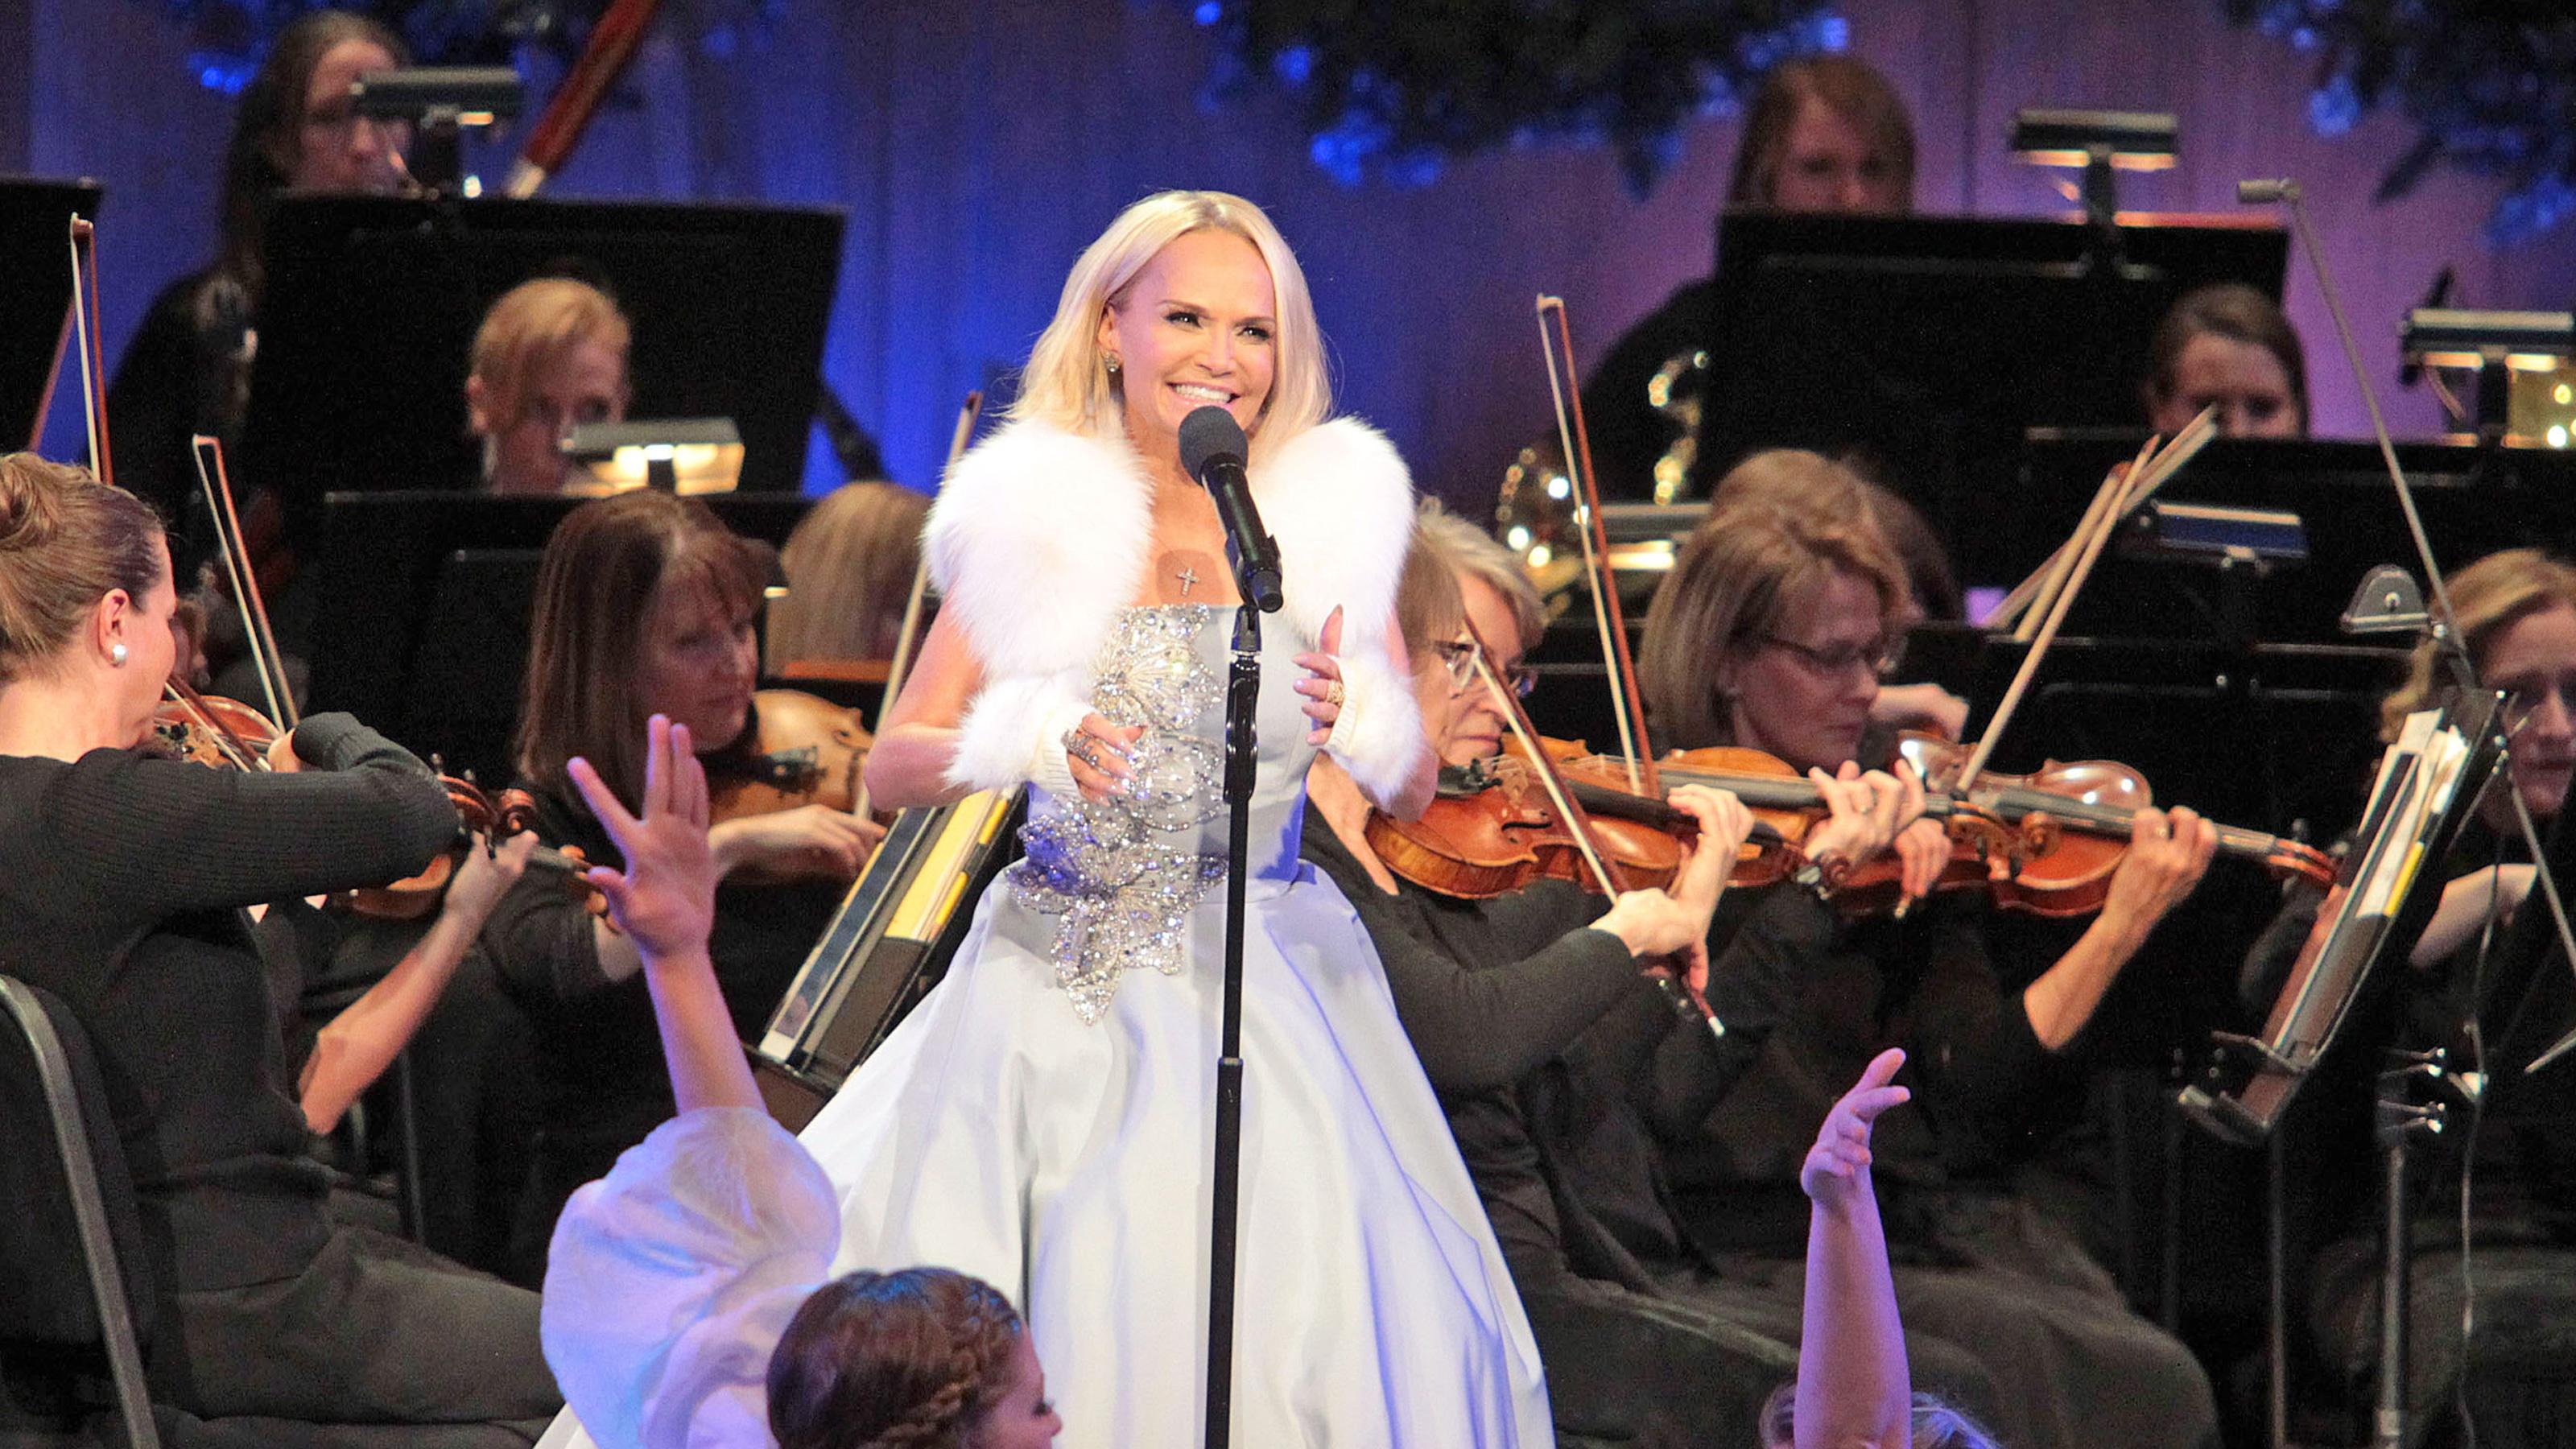 Kristin Chenoweth smiles on stage in front of a microphone with violinists playing behind her.